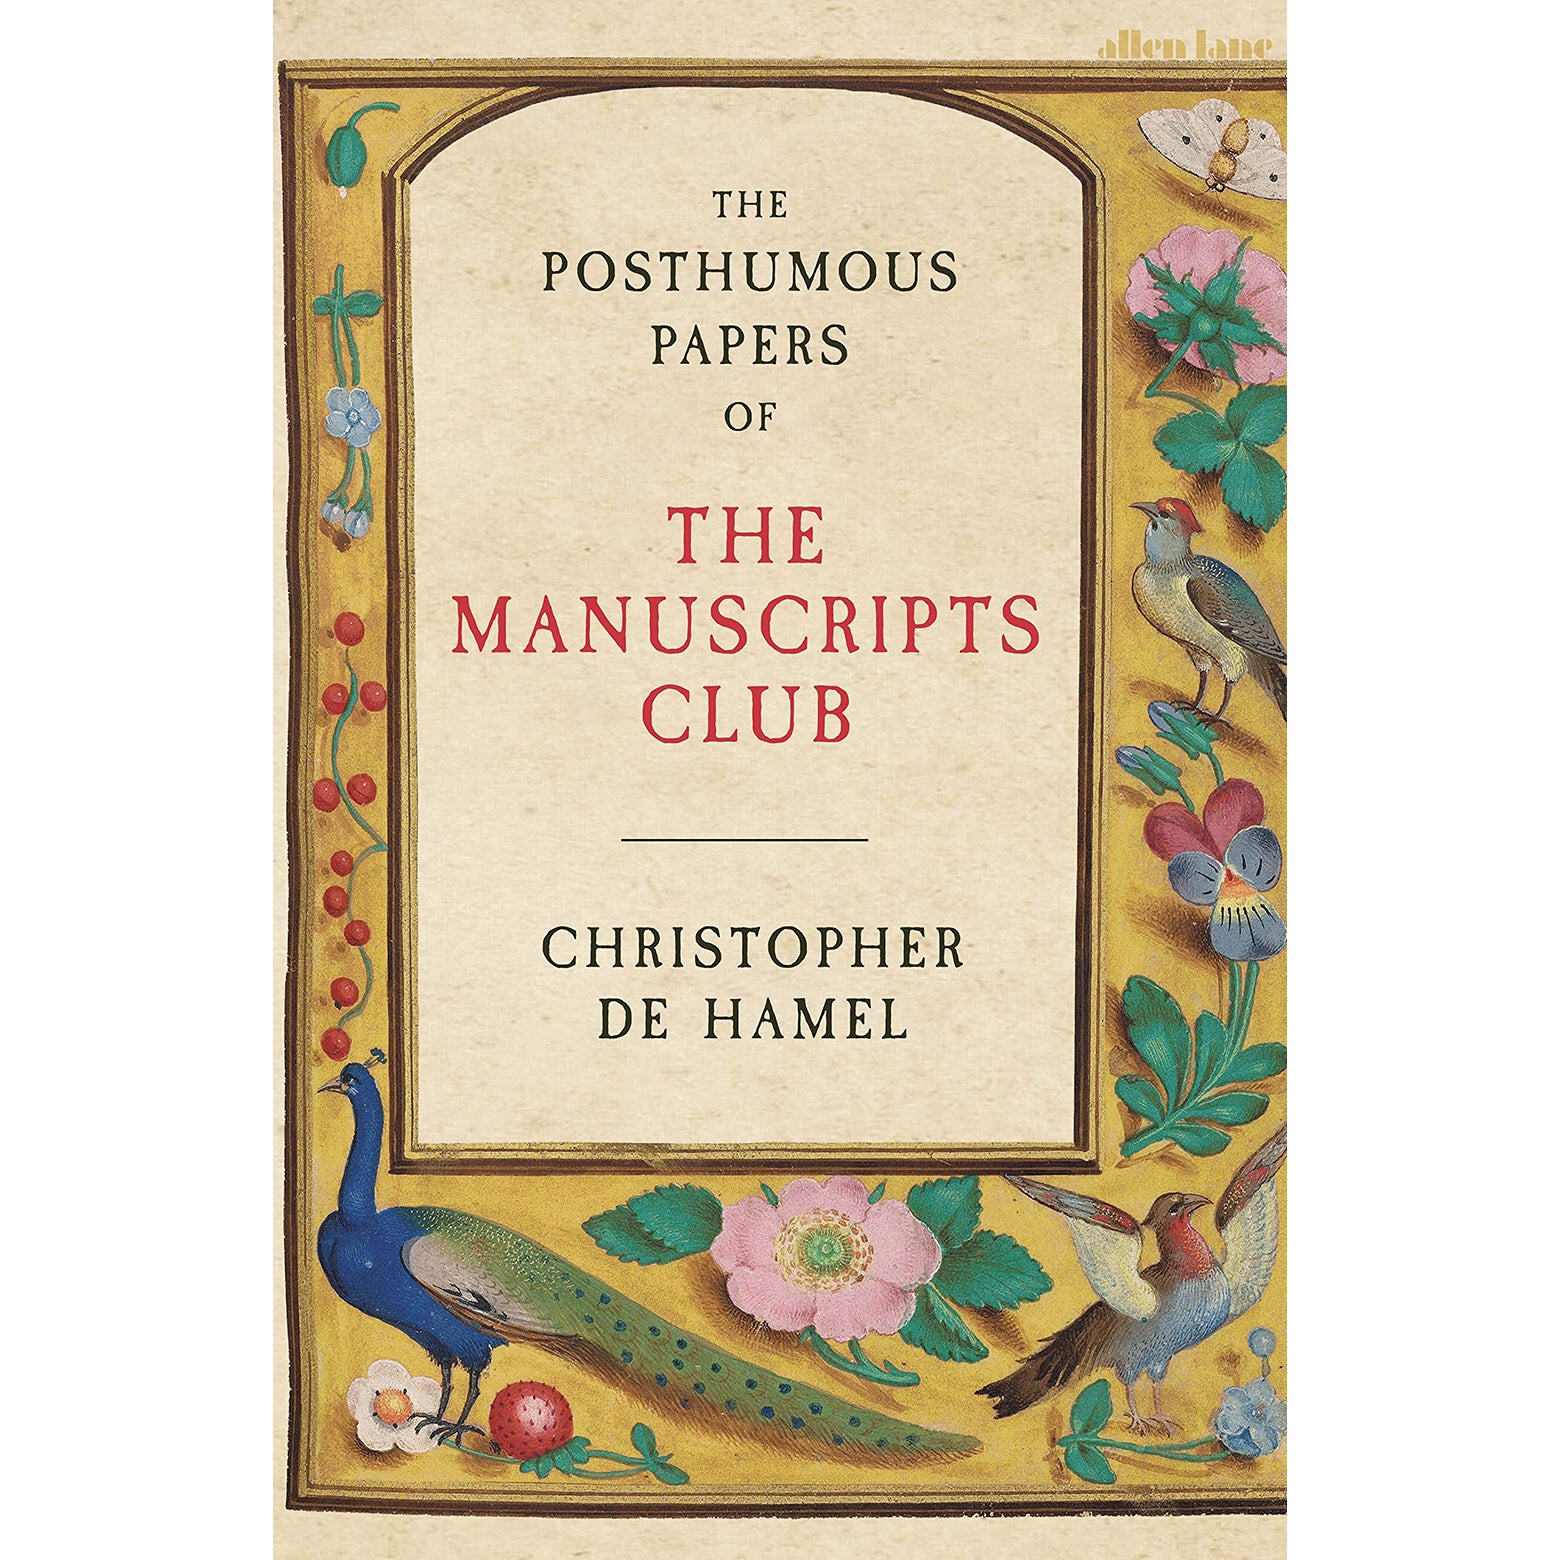 Cover of The Posthumous Papers of the Manuscripts Club